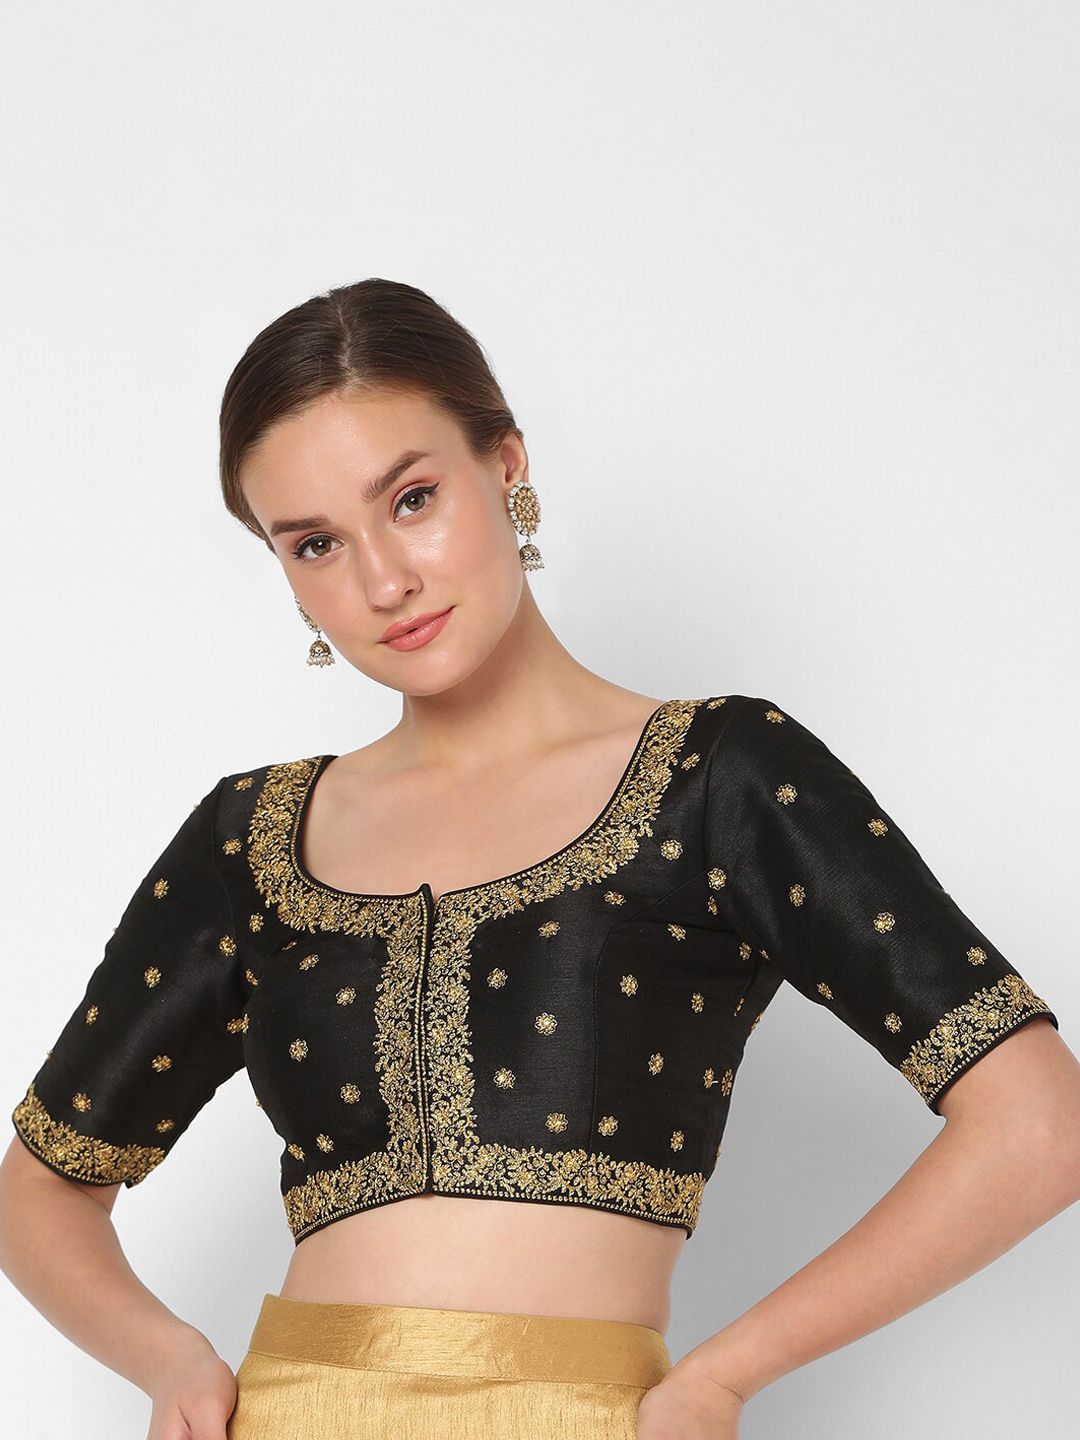 SALWAR STUDIO Black & Gold-Coloured Embroidered Readymade Saree Blouse Price in India